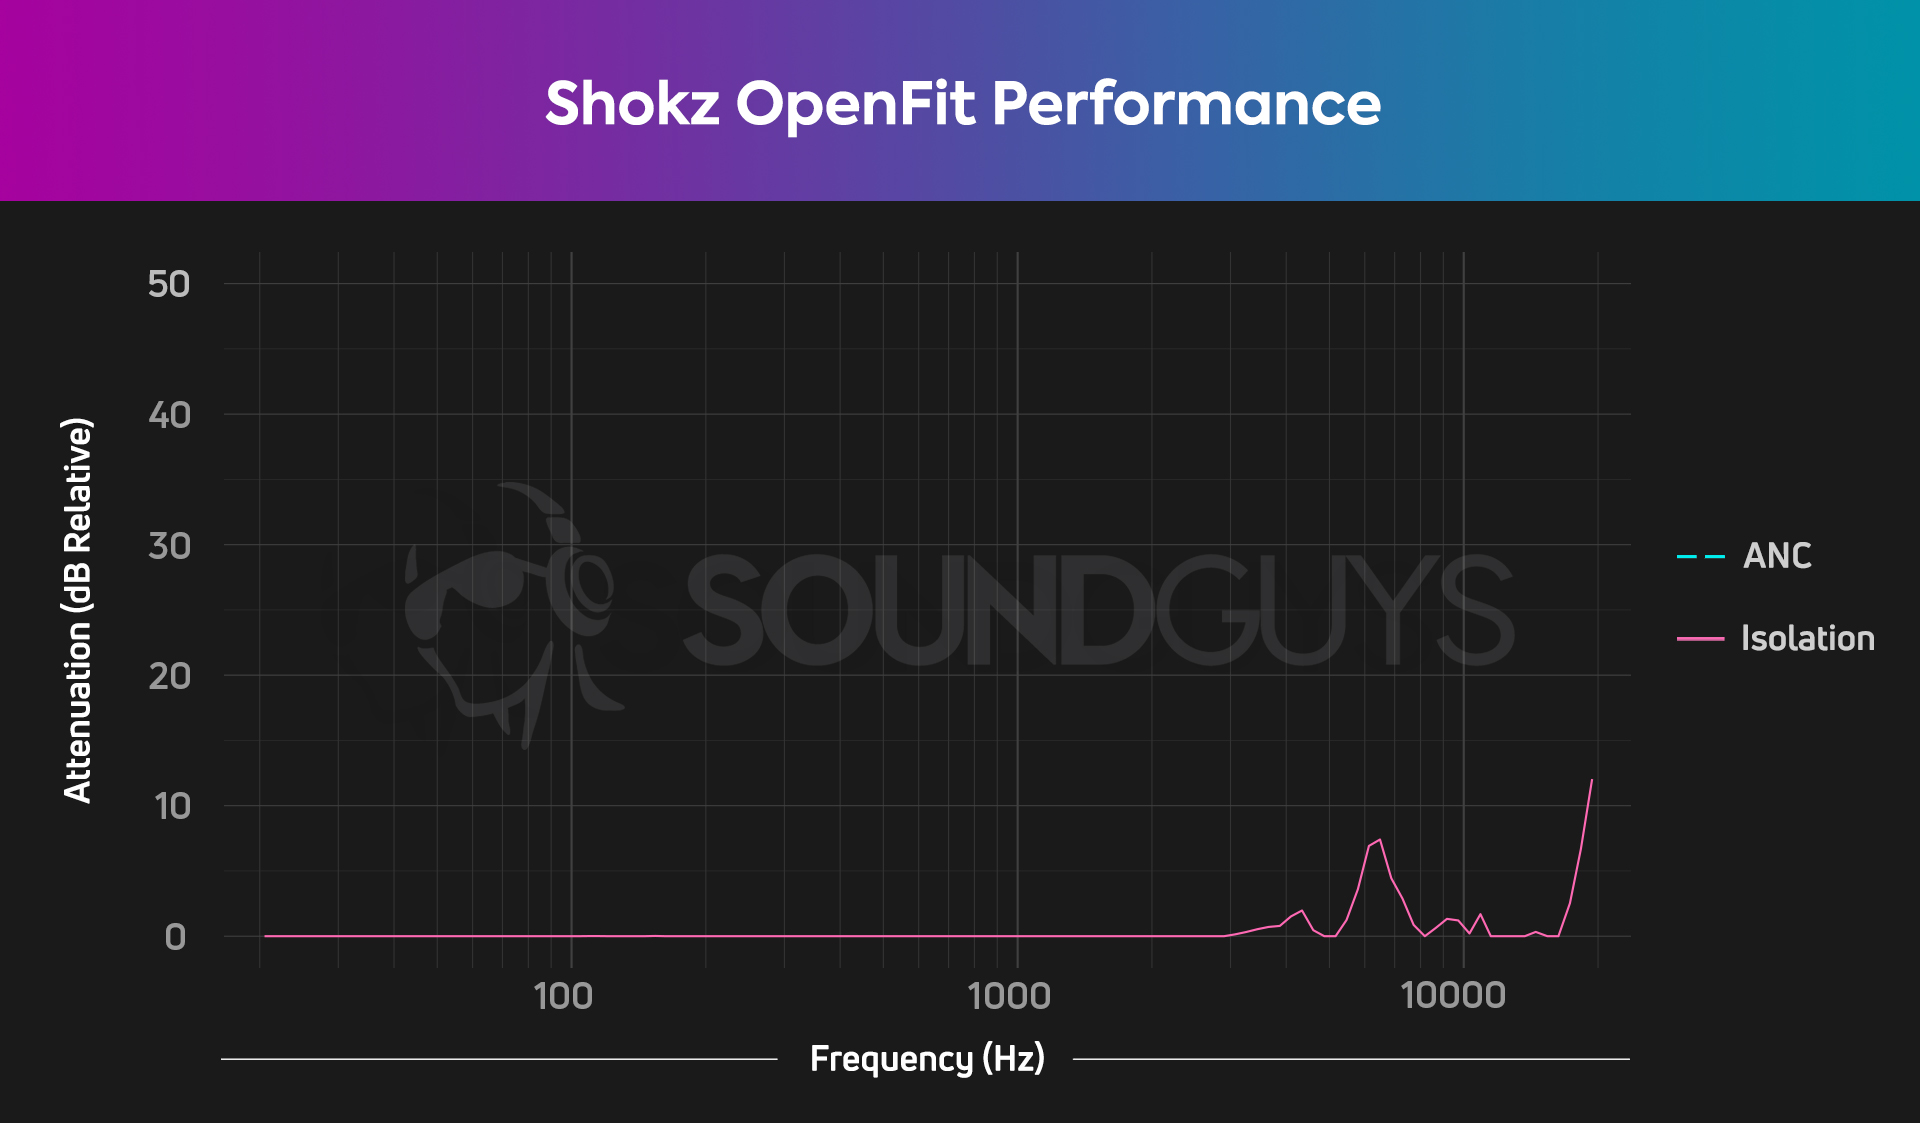 A chart shows the minimal isolation of the Shokz OpenFit.